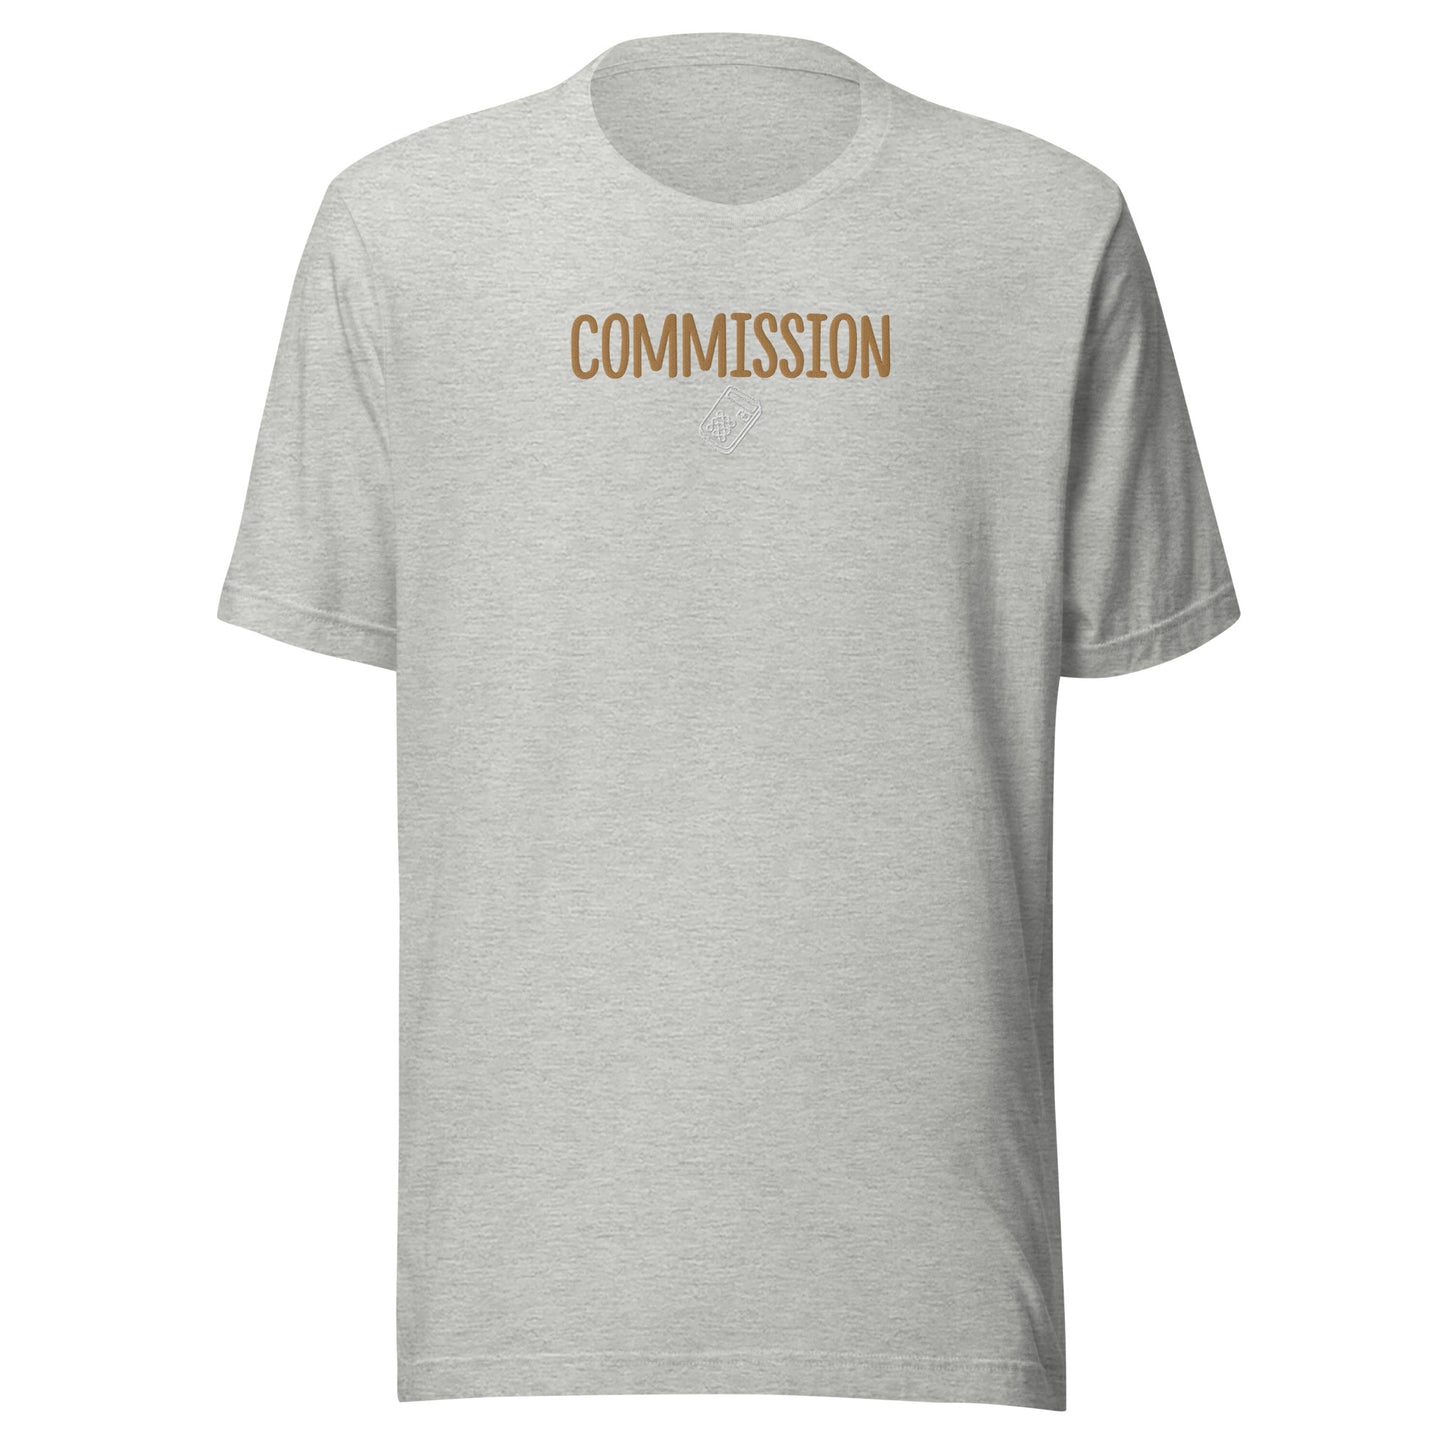 ONE Unisex Commission T-Shirt (Traditional)